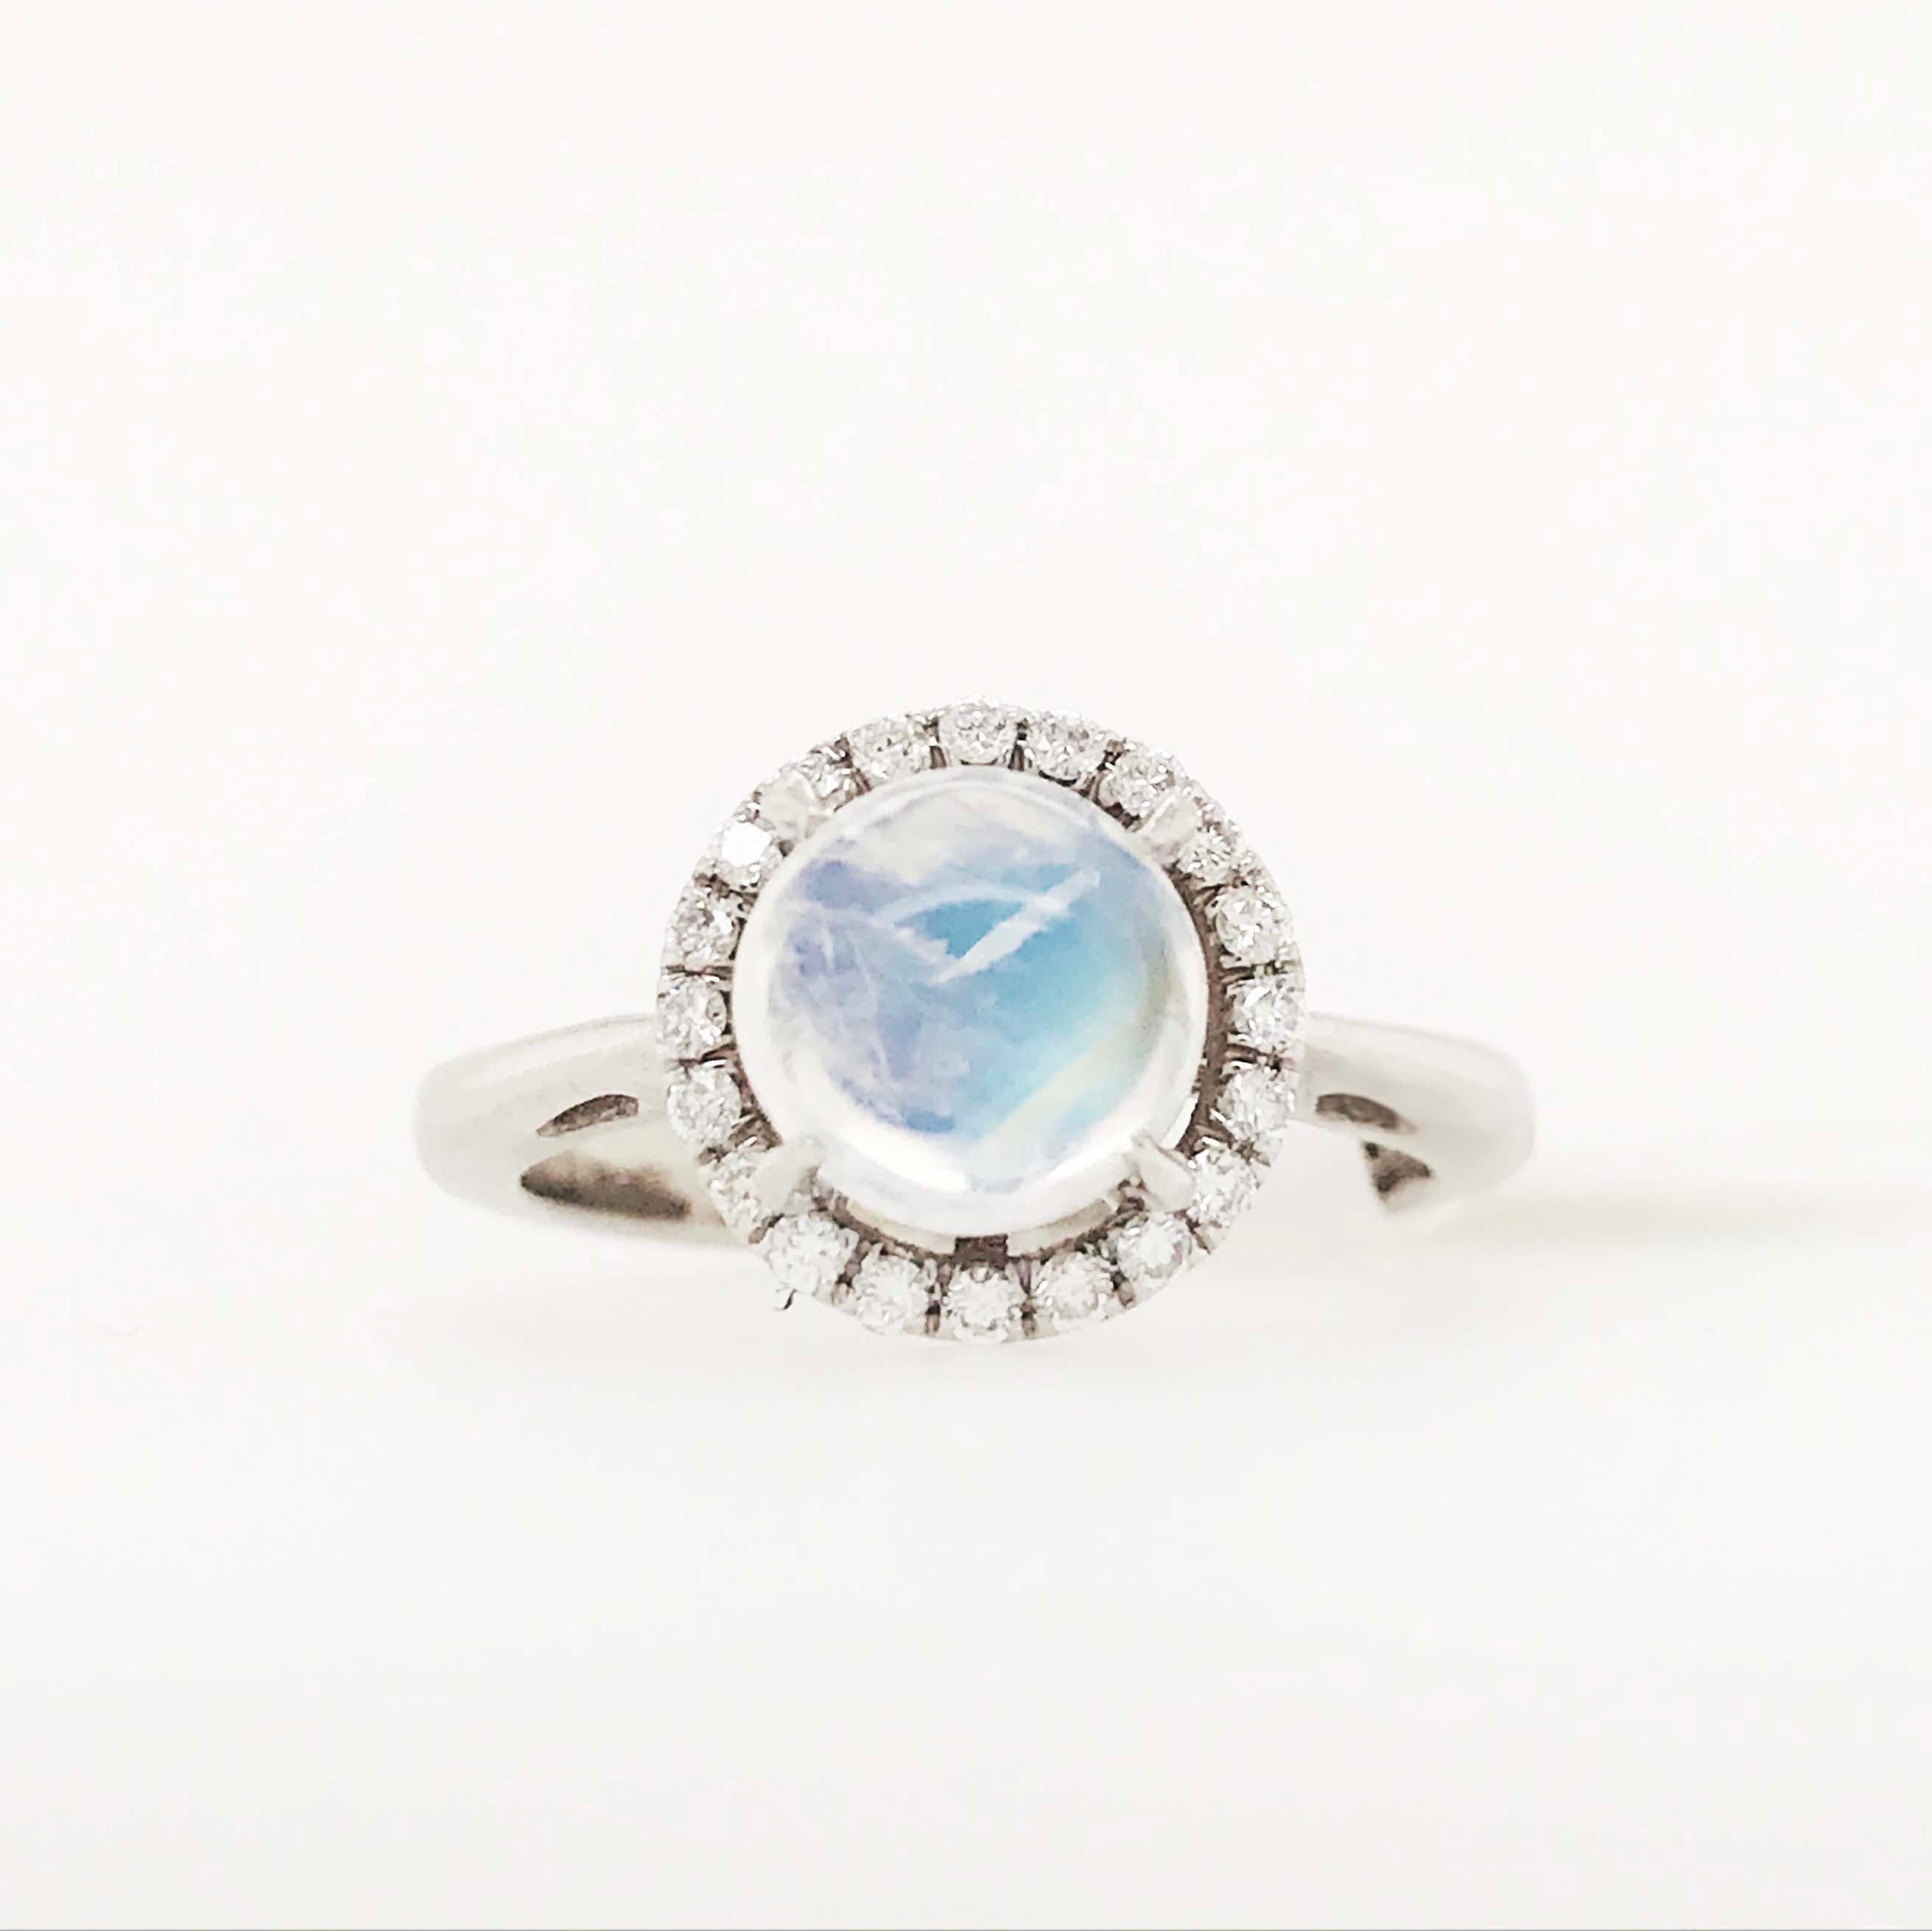 This diamond and moonstone platinum engagement ring is very modern and so unique! With an alternative center stone, the gorgeous rainbow moonstone! The rainbow moonstone is a unique and special genuine gemstone that has a gorgeous iridescence and